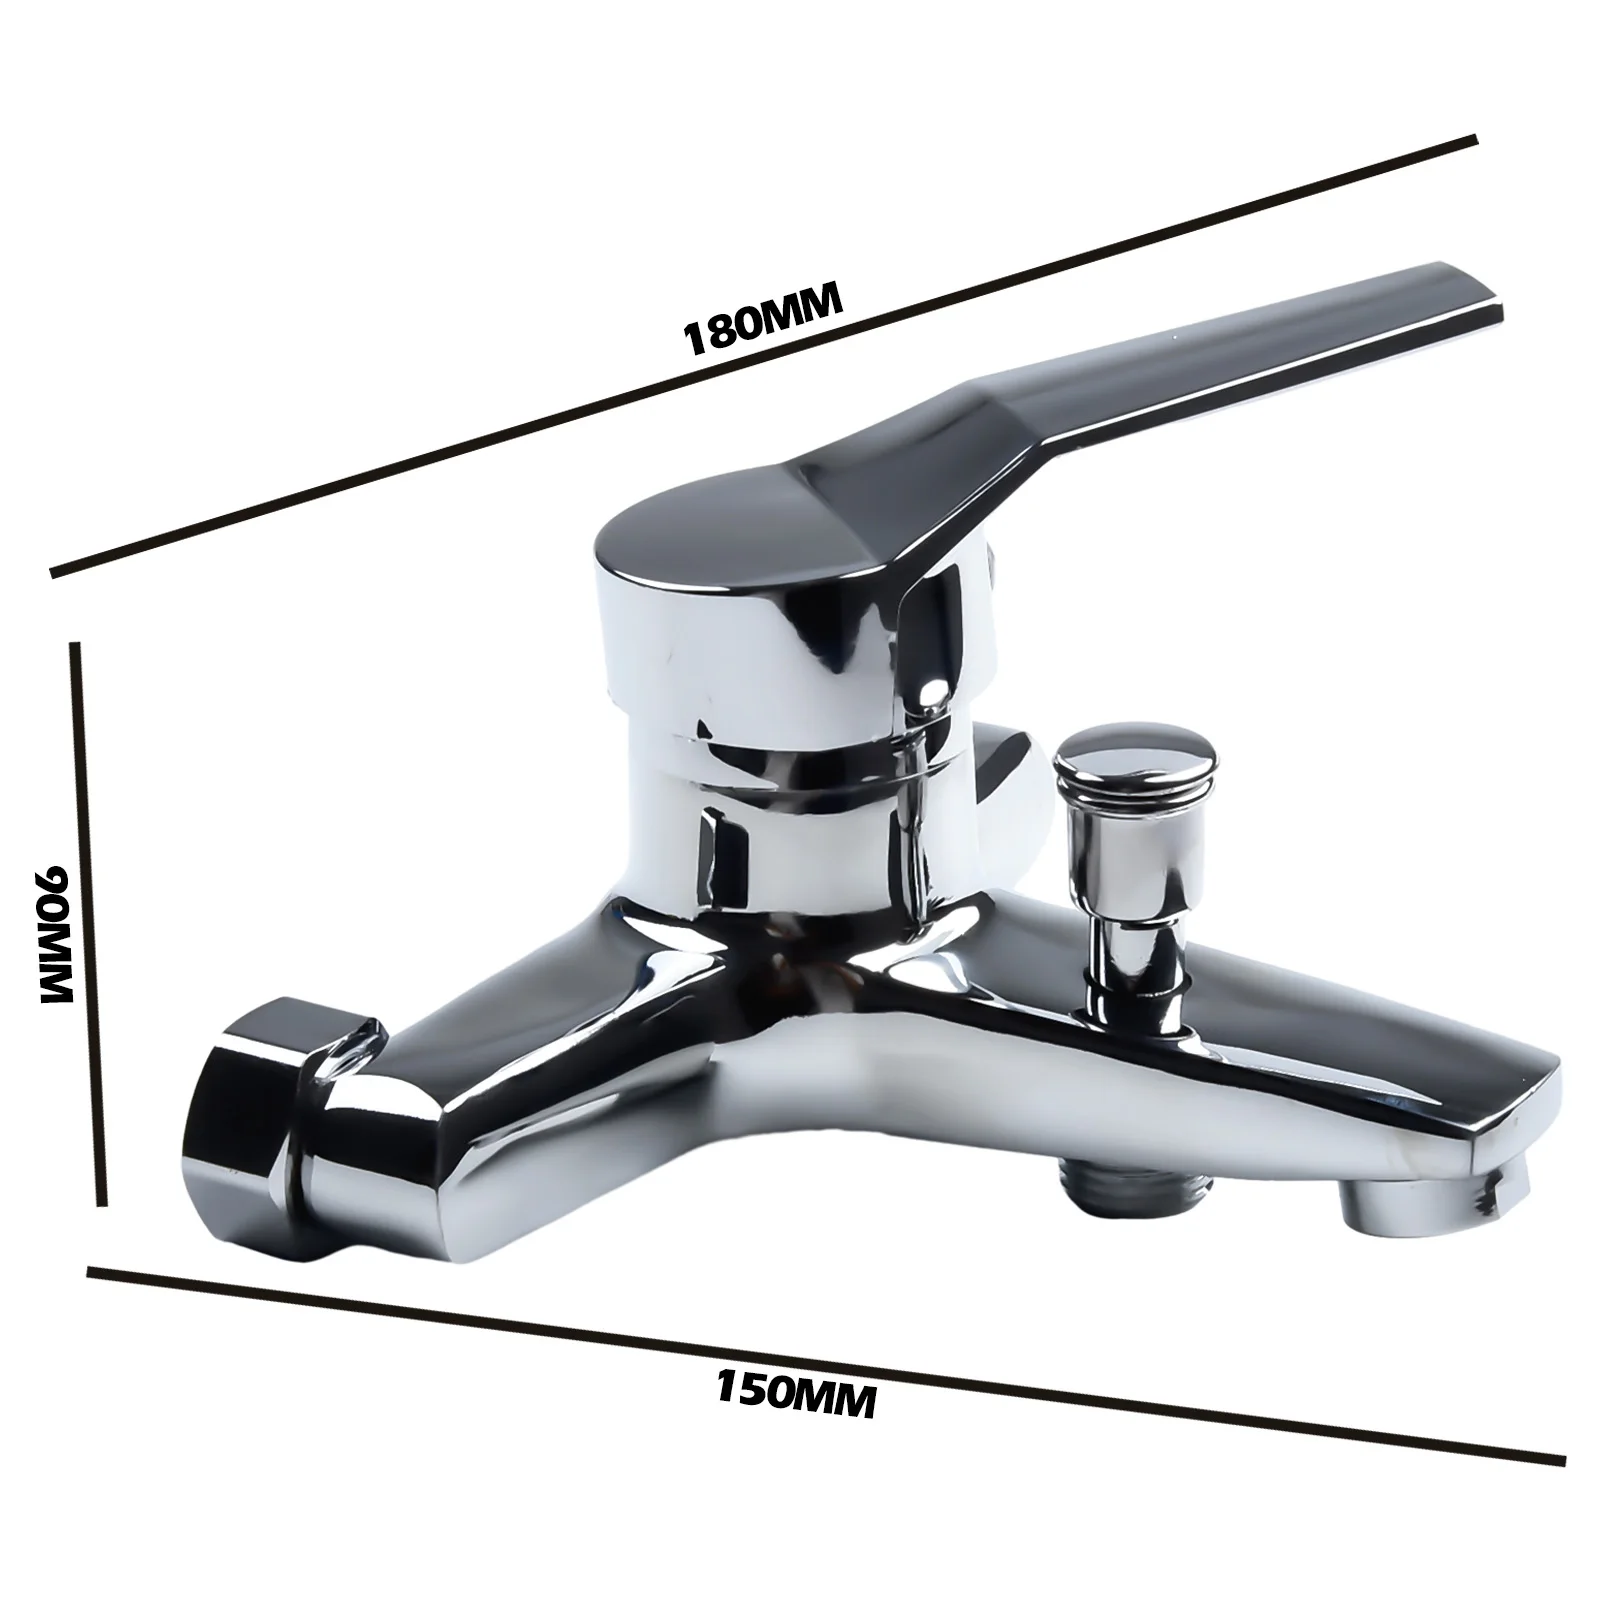 

Revolutionary Zinc Alloy Tap Wall Mounted Chrome Finished Basin Faucets Dual Hot & Cold Water Spouts Redefining Modern Bathrooms